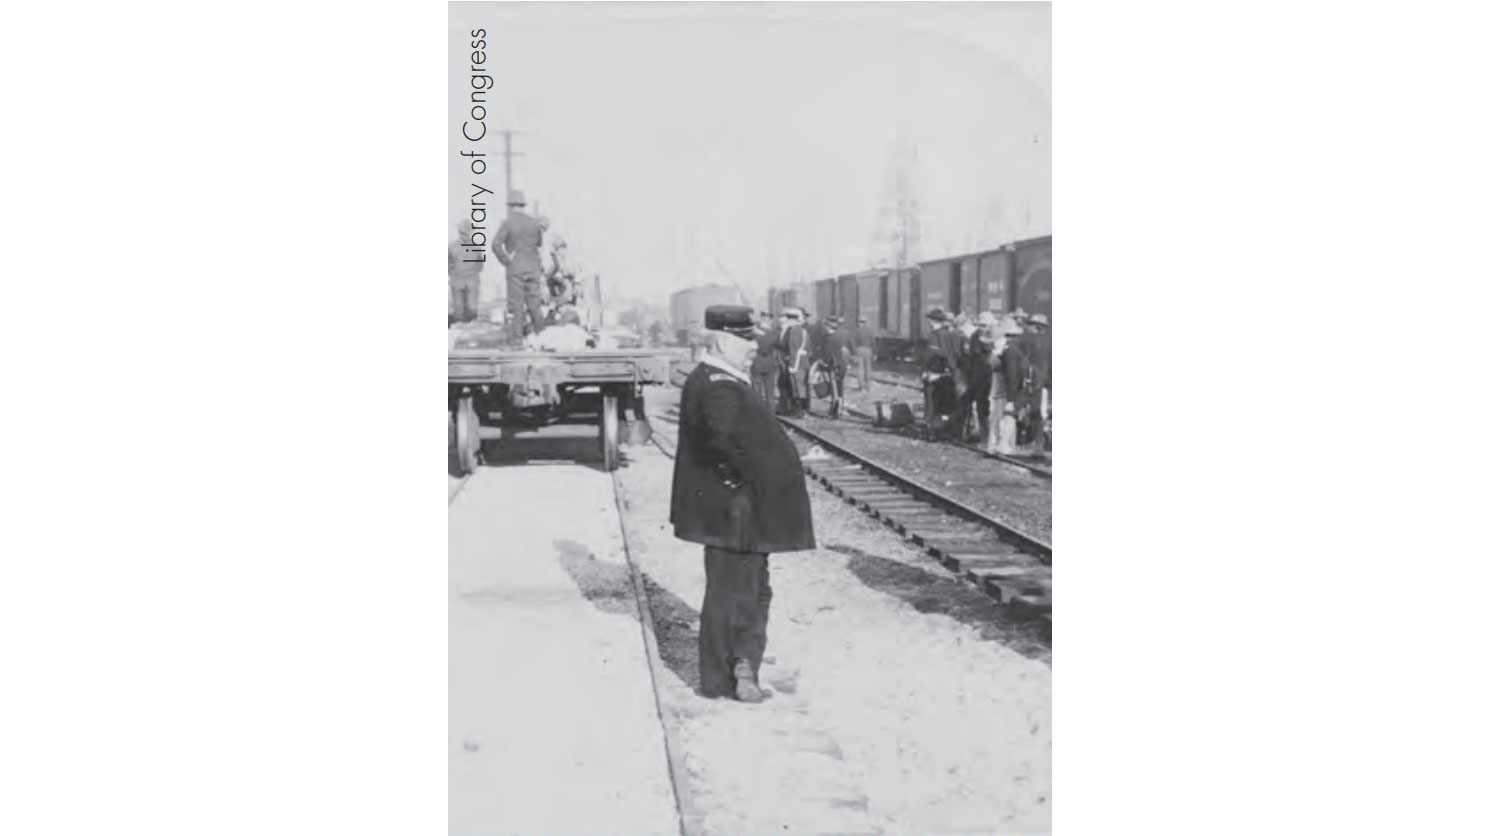 General Shafter observes the unloading of railcars in Tampa.